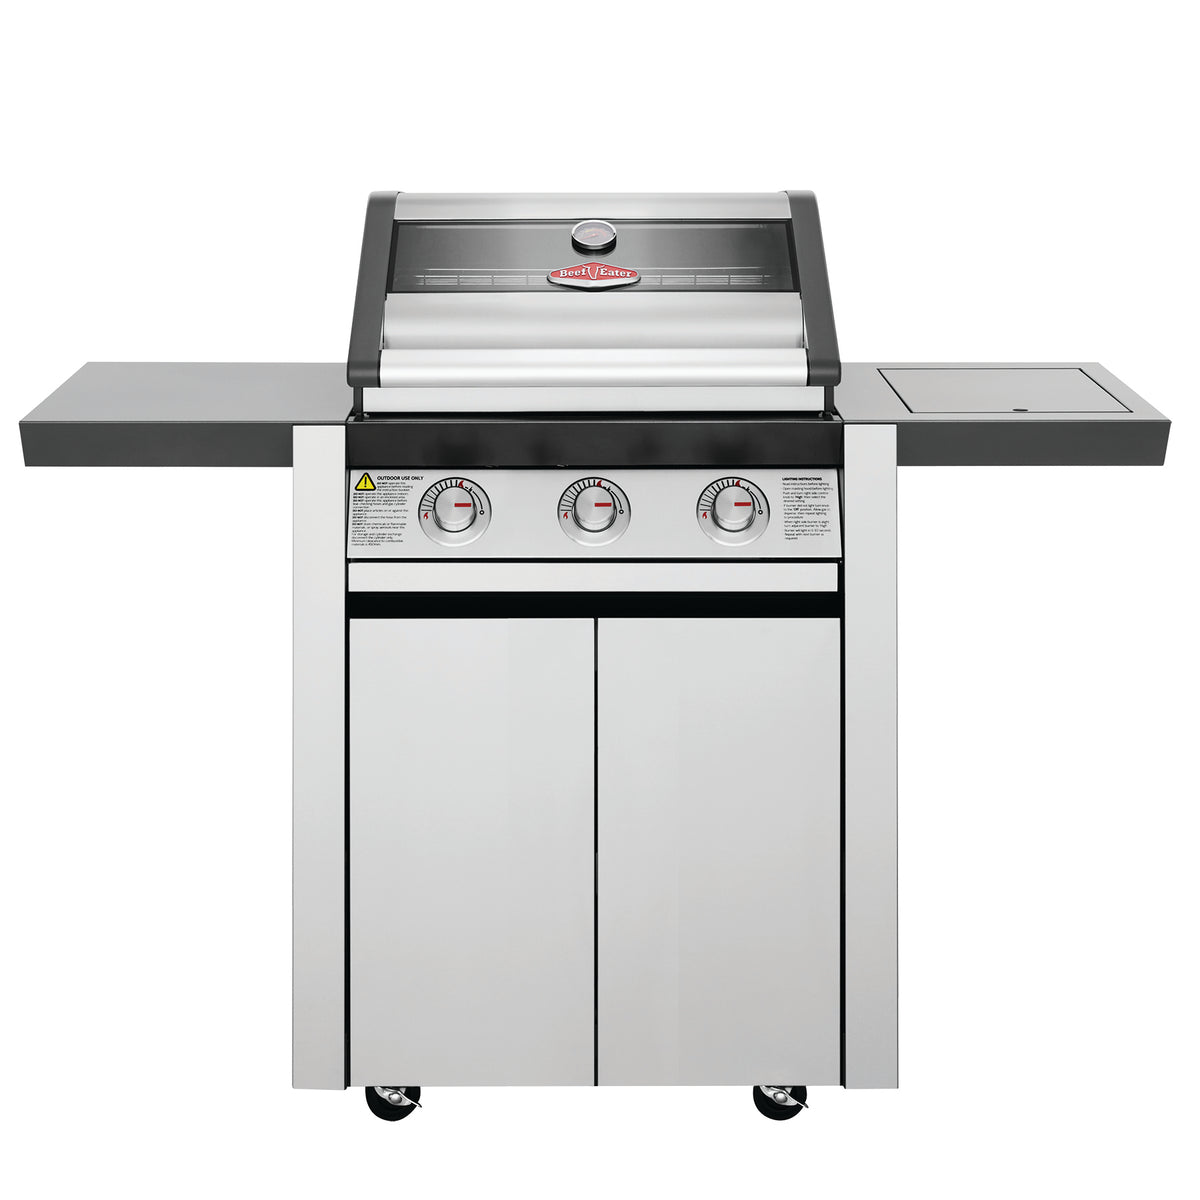 BeefEater 1600S Series 3 Burner Barbecue with Cabinet Trolley and Side Burner